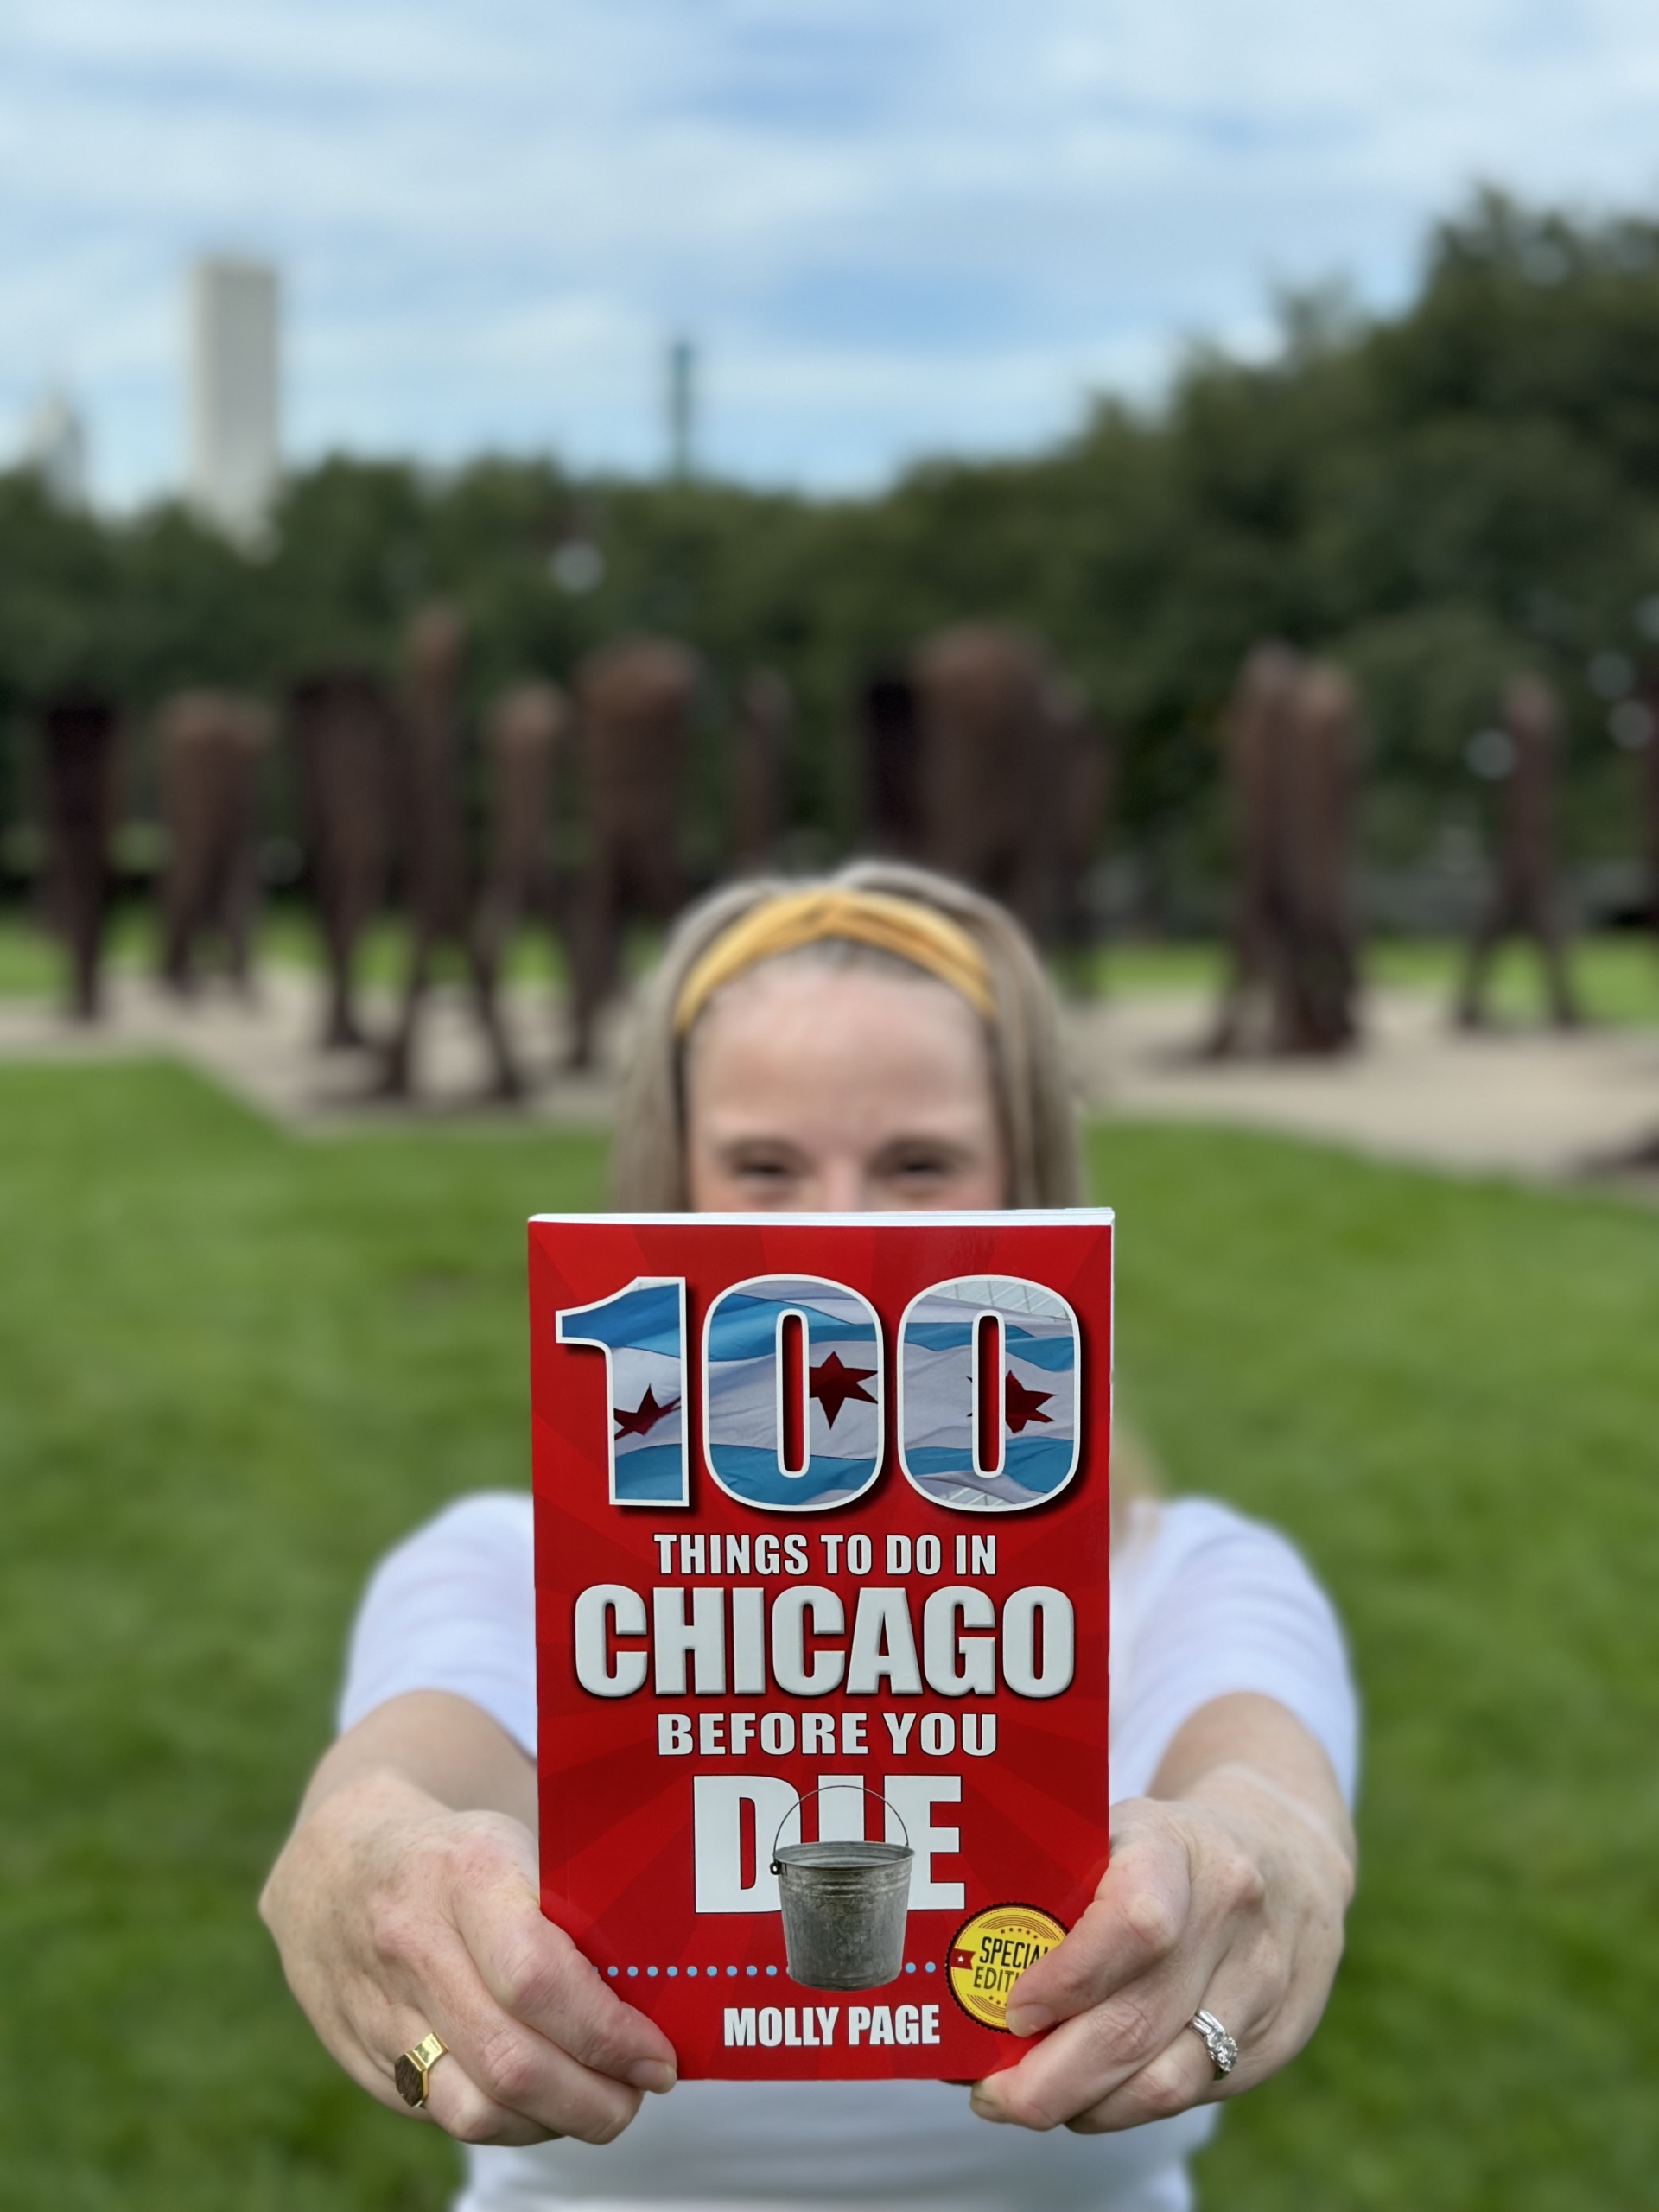 100 Things to Do in Chicago Before You Die by Molly Page mollypg